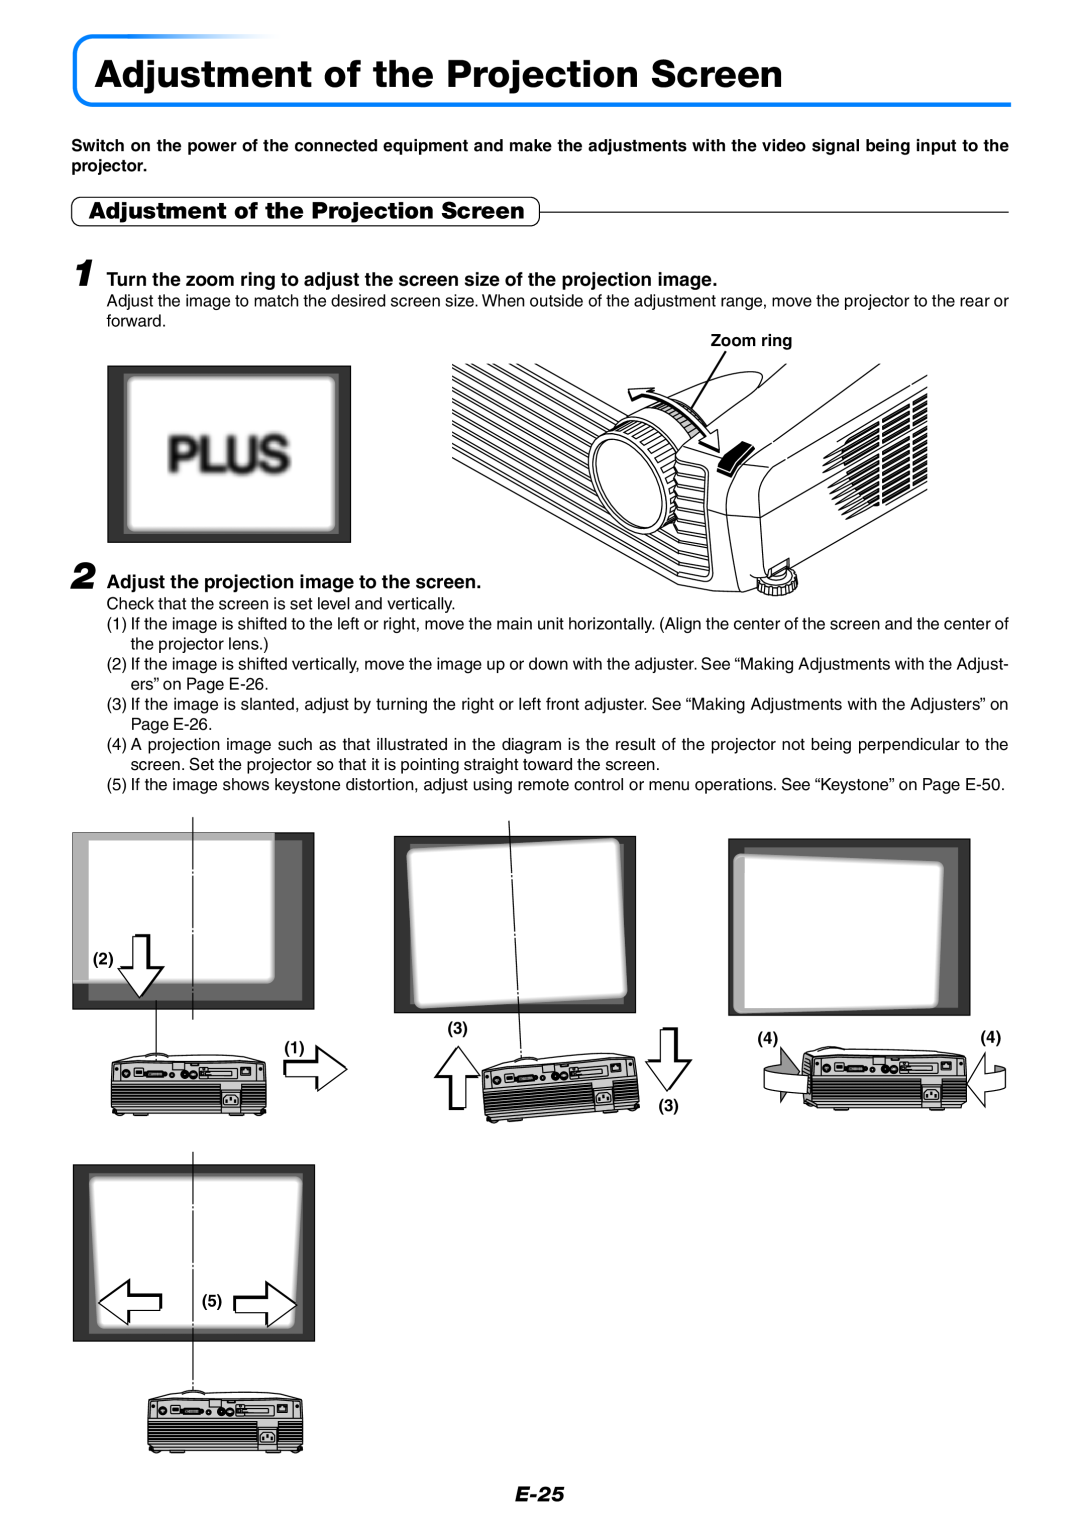 PLUS Vision U7-132h, U7-137 user manual Adjustment of the Projection Screen, E-25, Adjust the projection image to the screen 